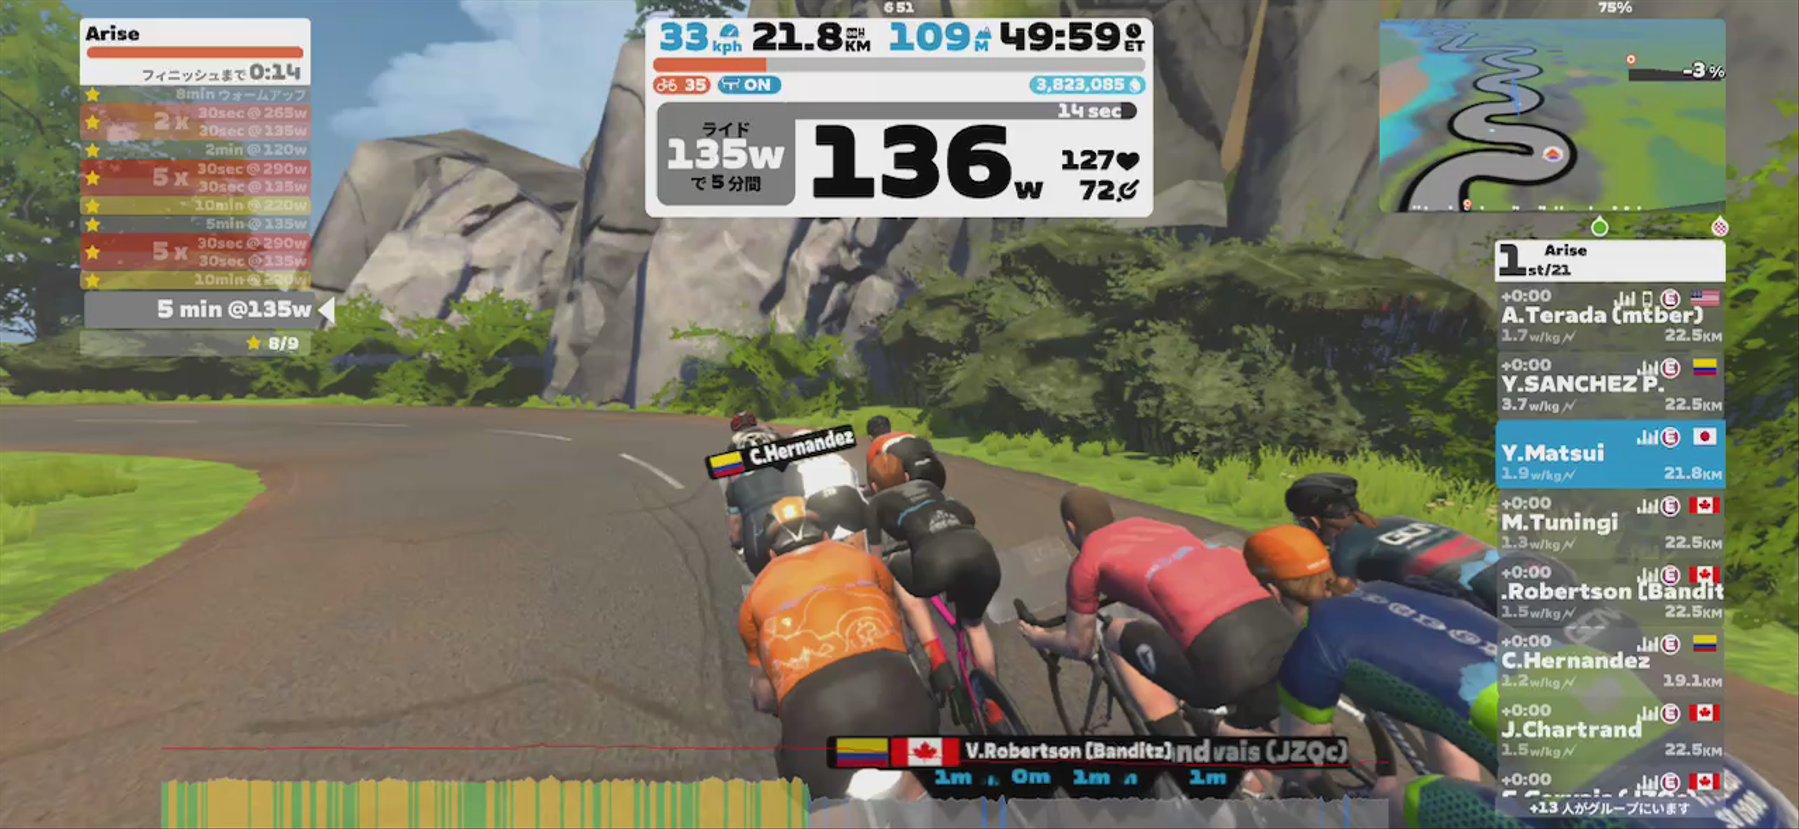 Zwift - Group Workout: Arise (E) on R.G.V. in France